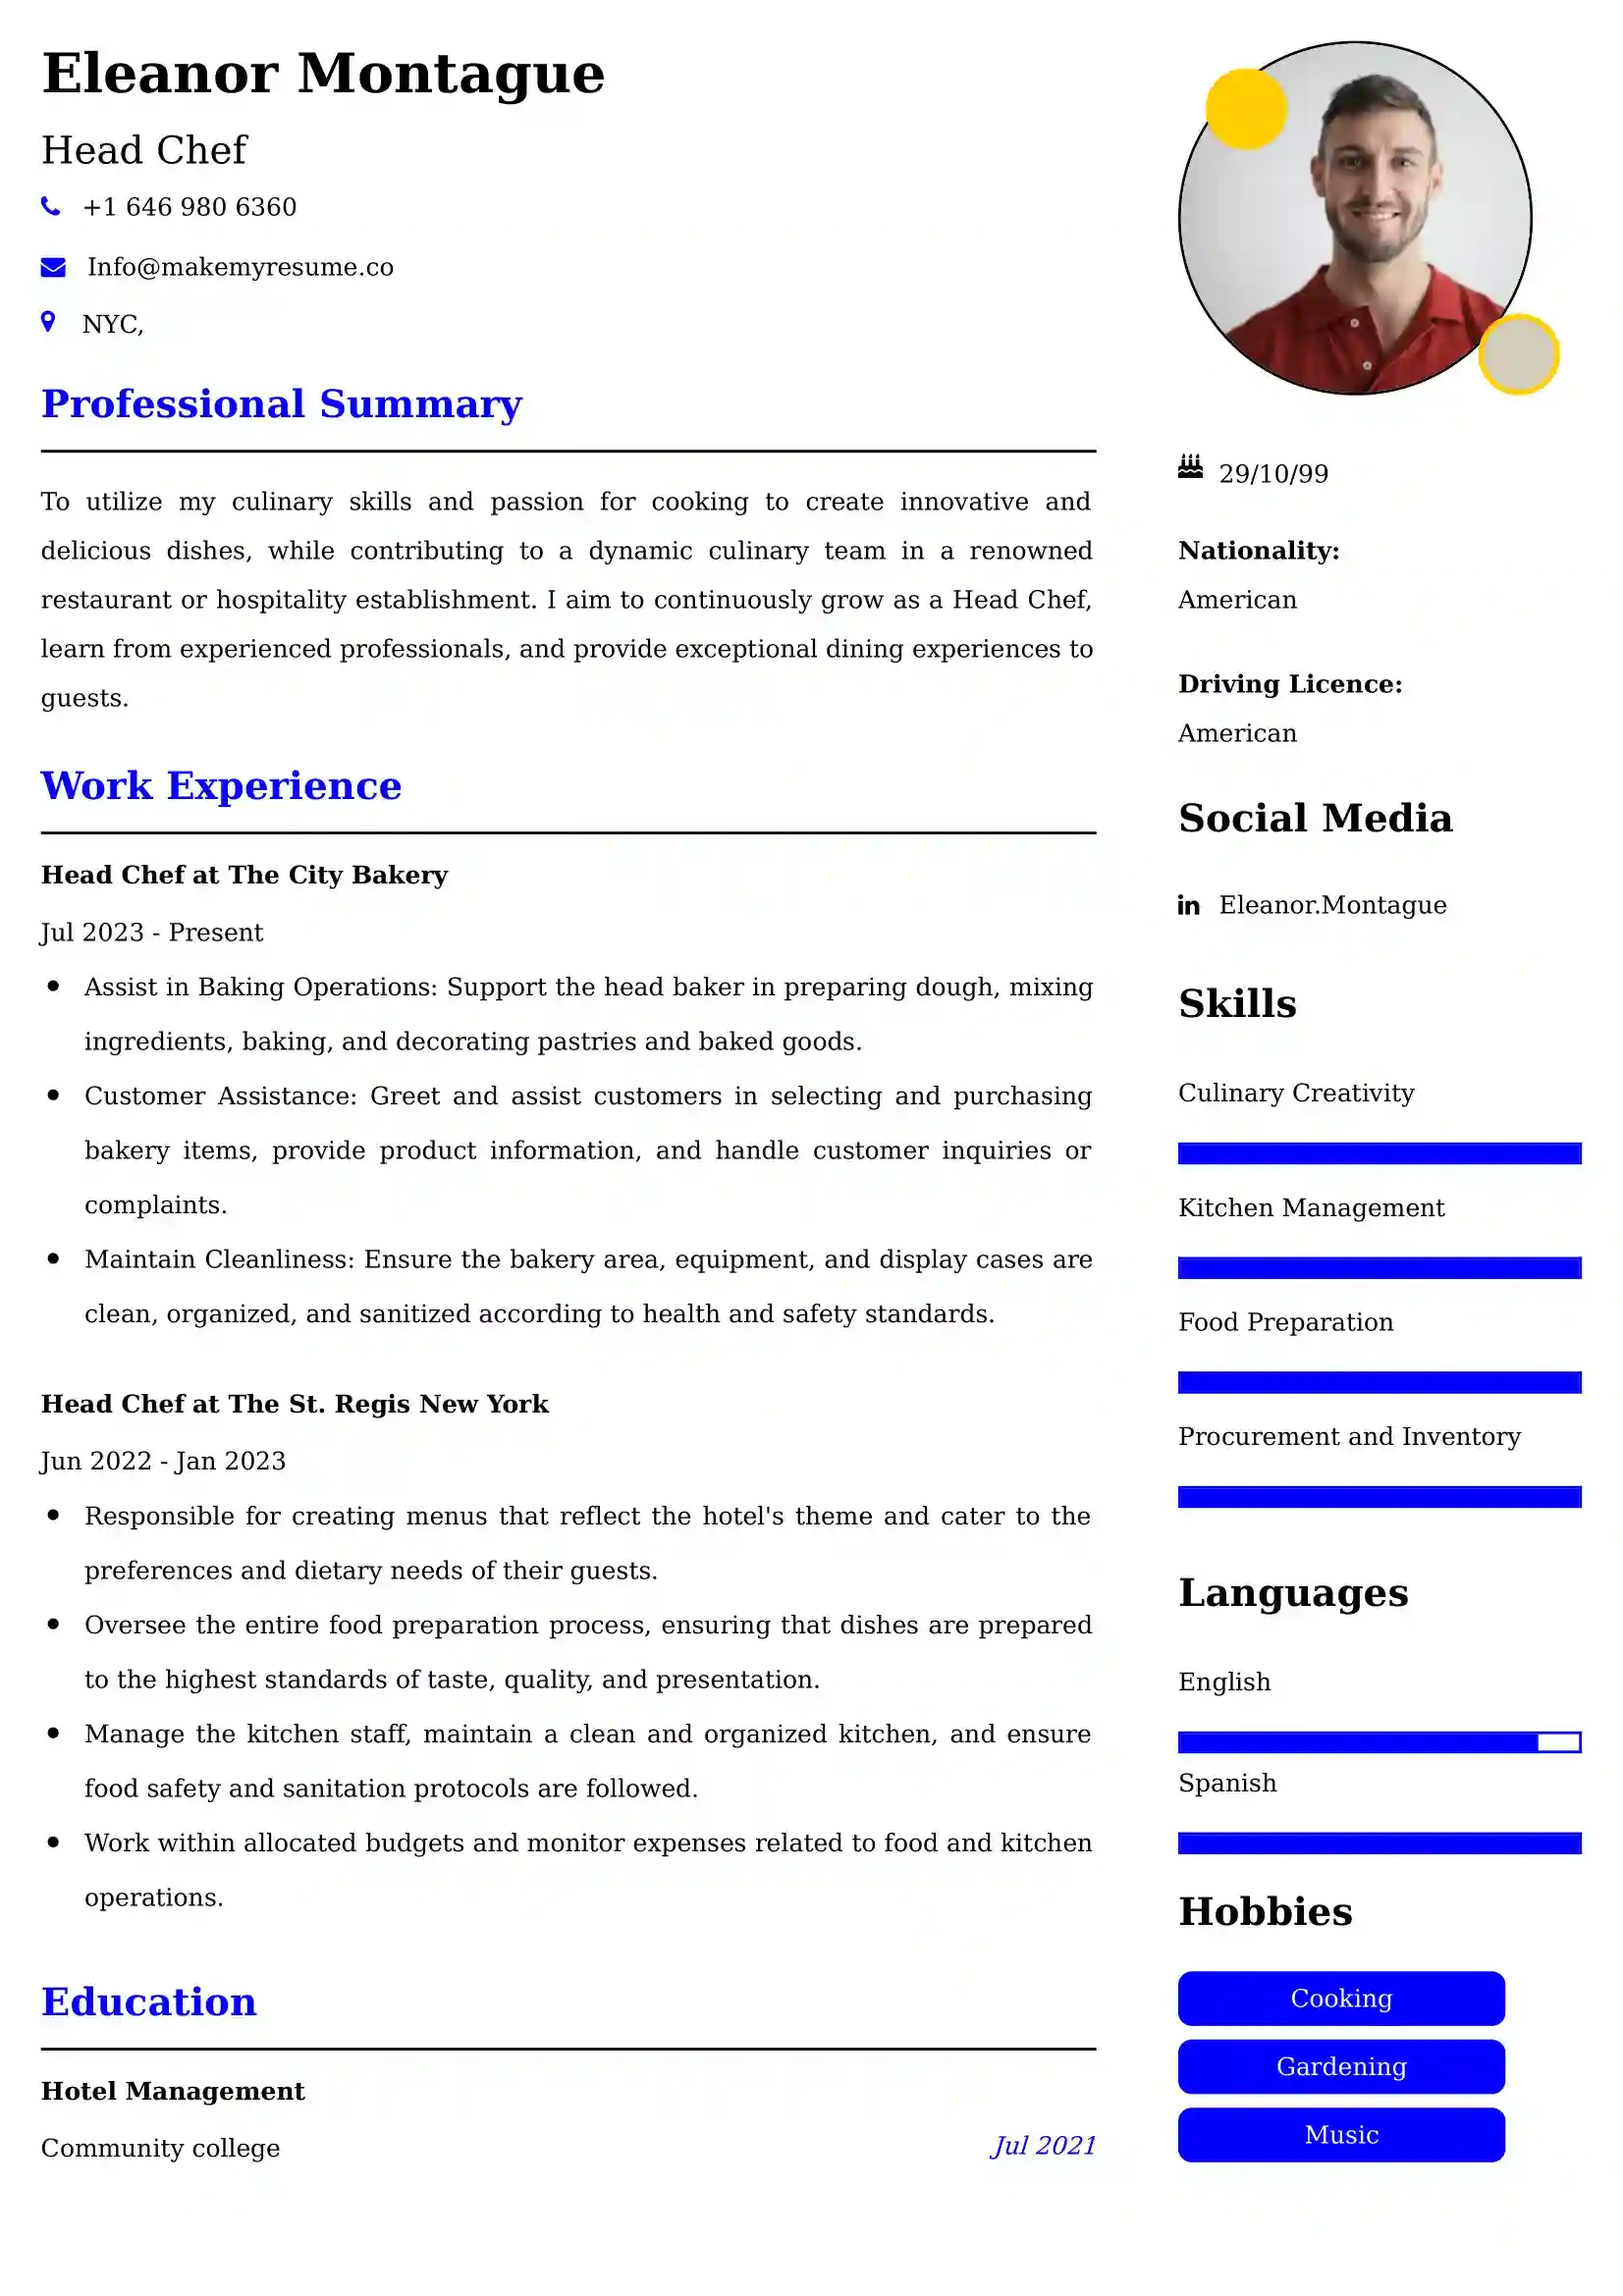 Head Chef Resume Examples - Brazilian Format, Latest Template